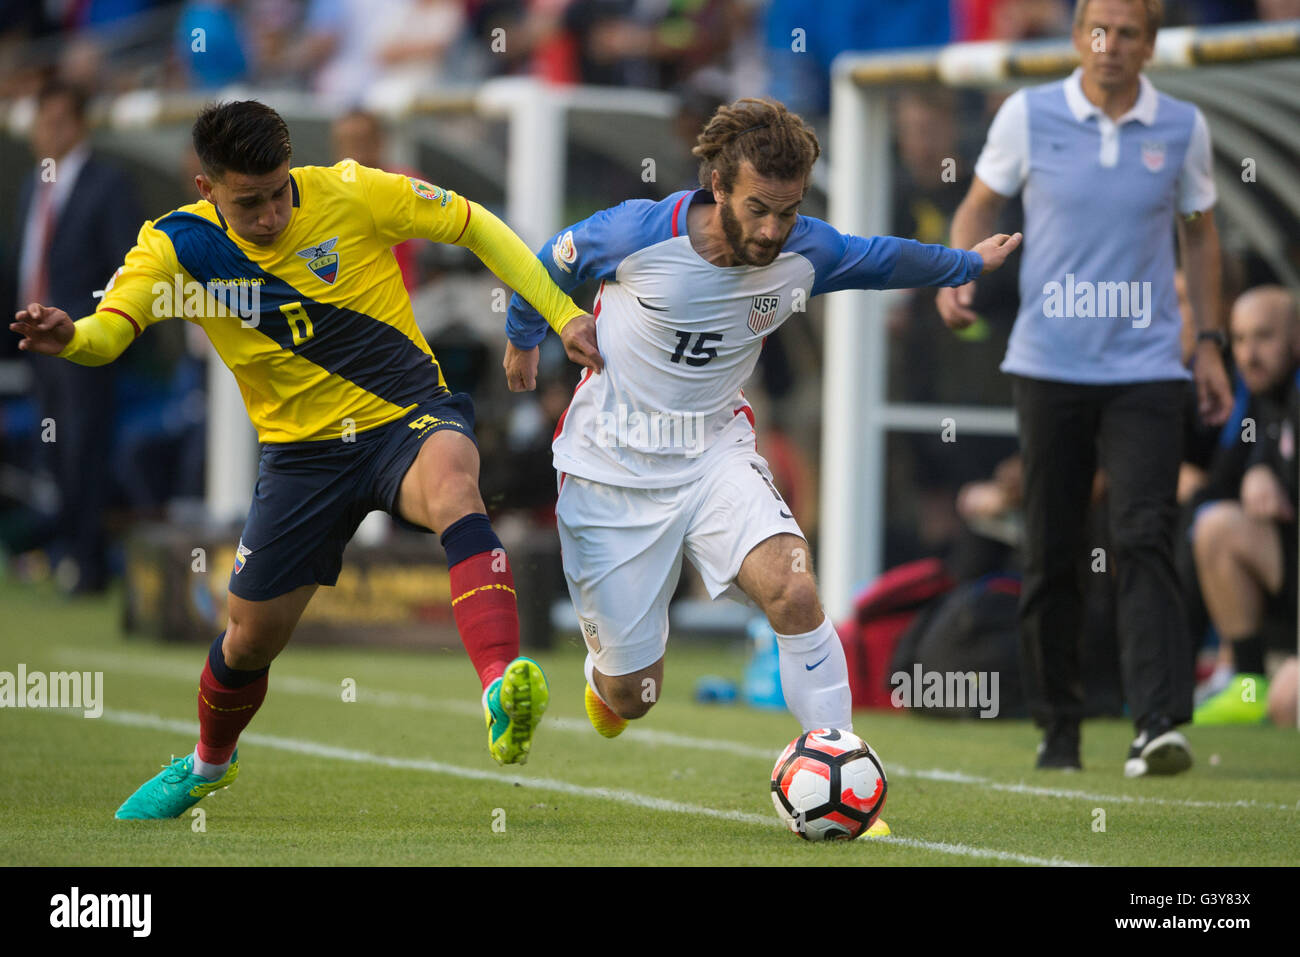 Seattle. 16th June, 2016. Kyle Beckerman (R) of the United States vies with Fernando Gaibor of Ecuador during their quarterfinal match of 2016 Copa America soccer tournament at Century Link Field in Seattle, the United States on June 16, 2016. The United States won 2-1. Credit:  Yang Lei/Xinhua/Alamy Live News Stock Photo